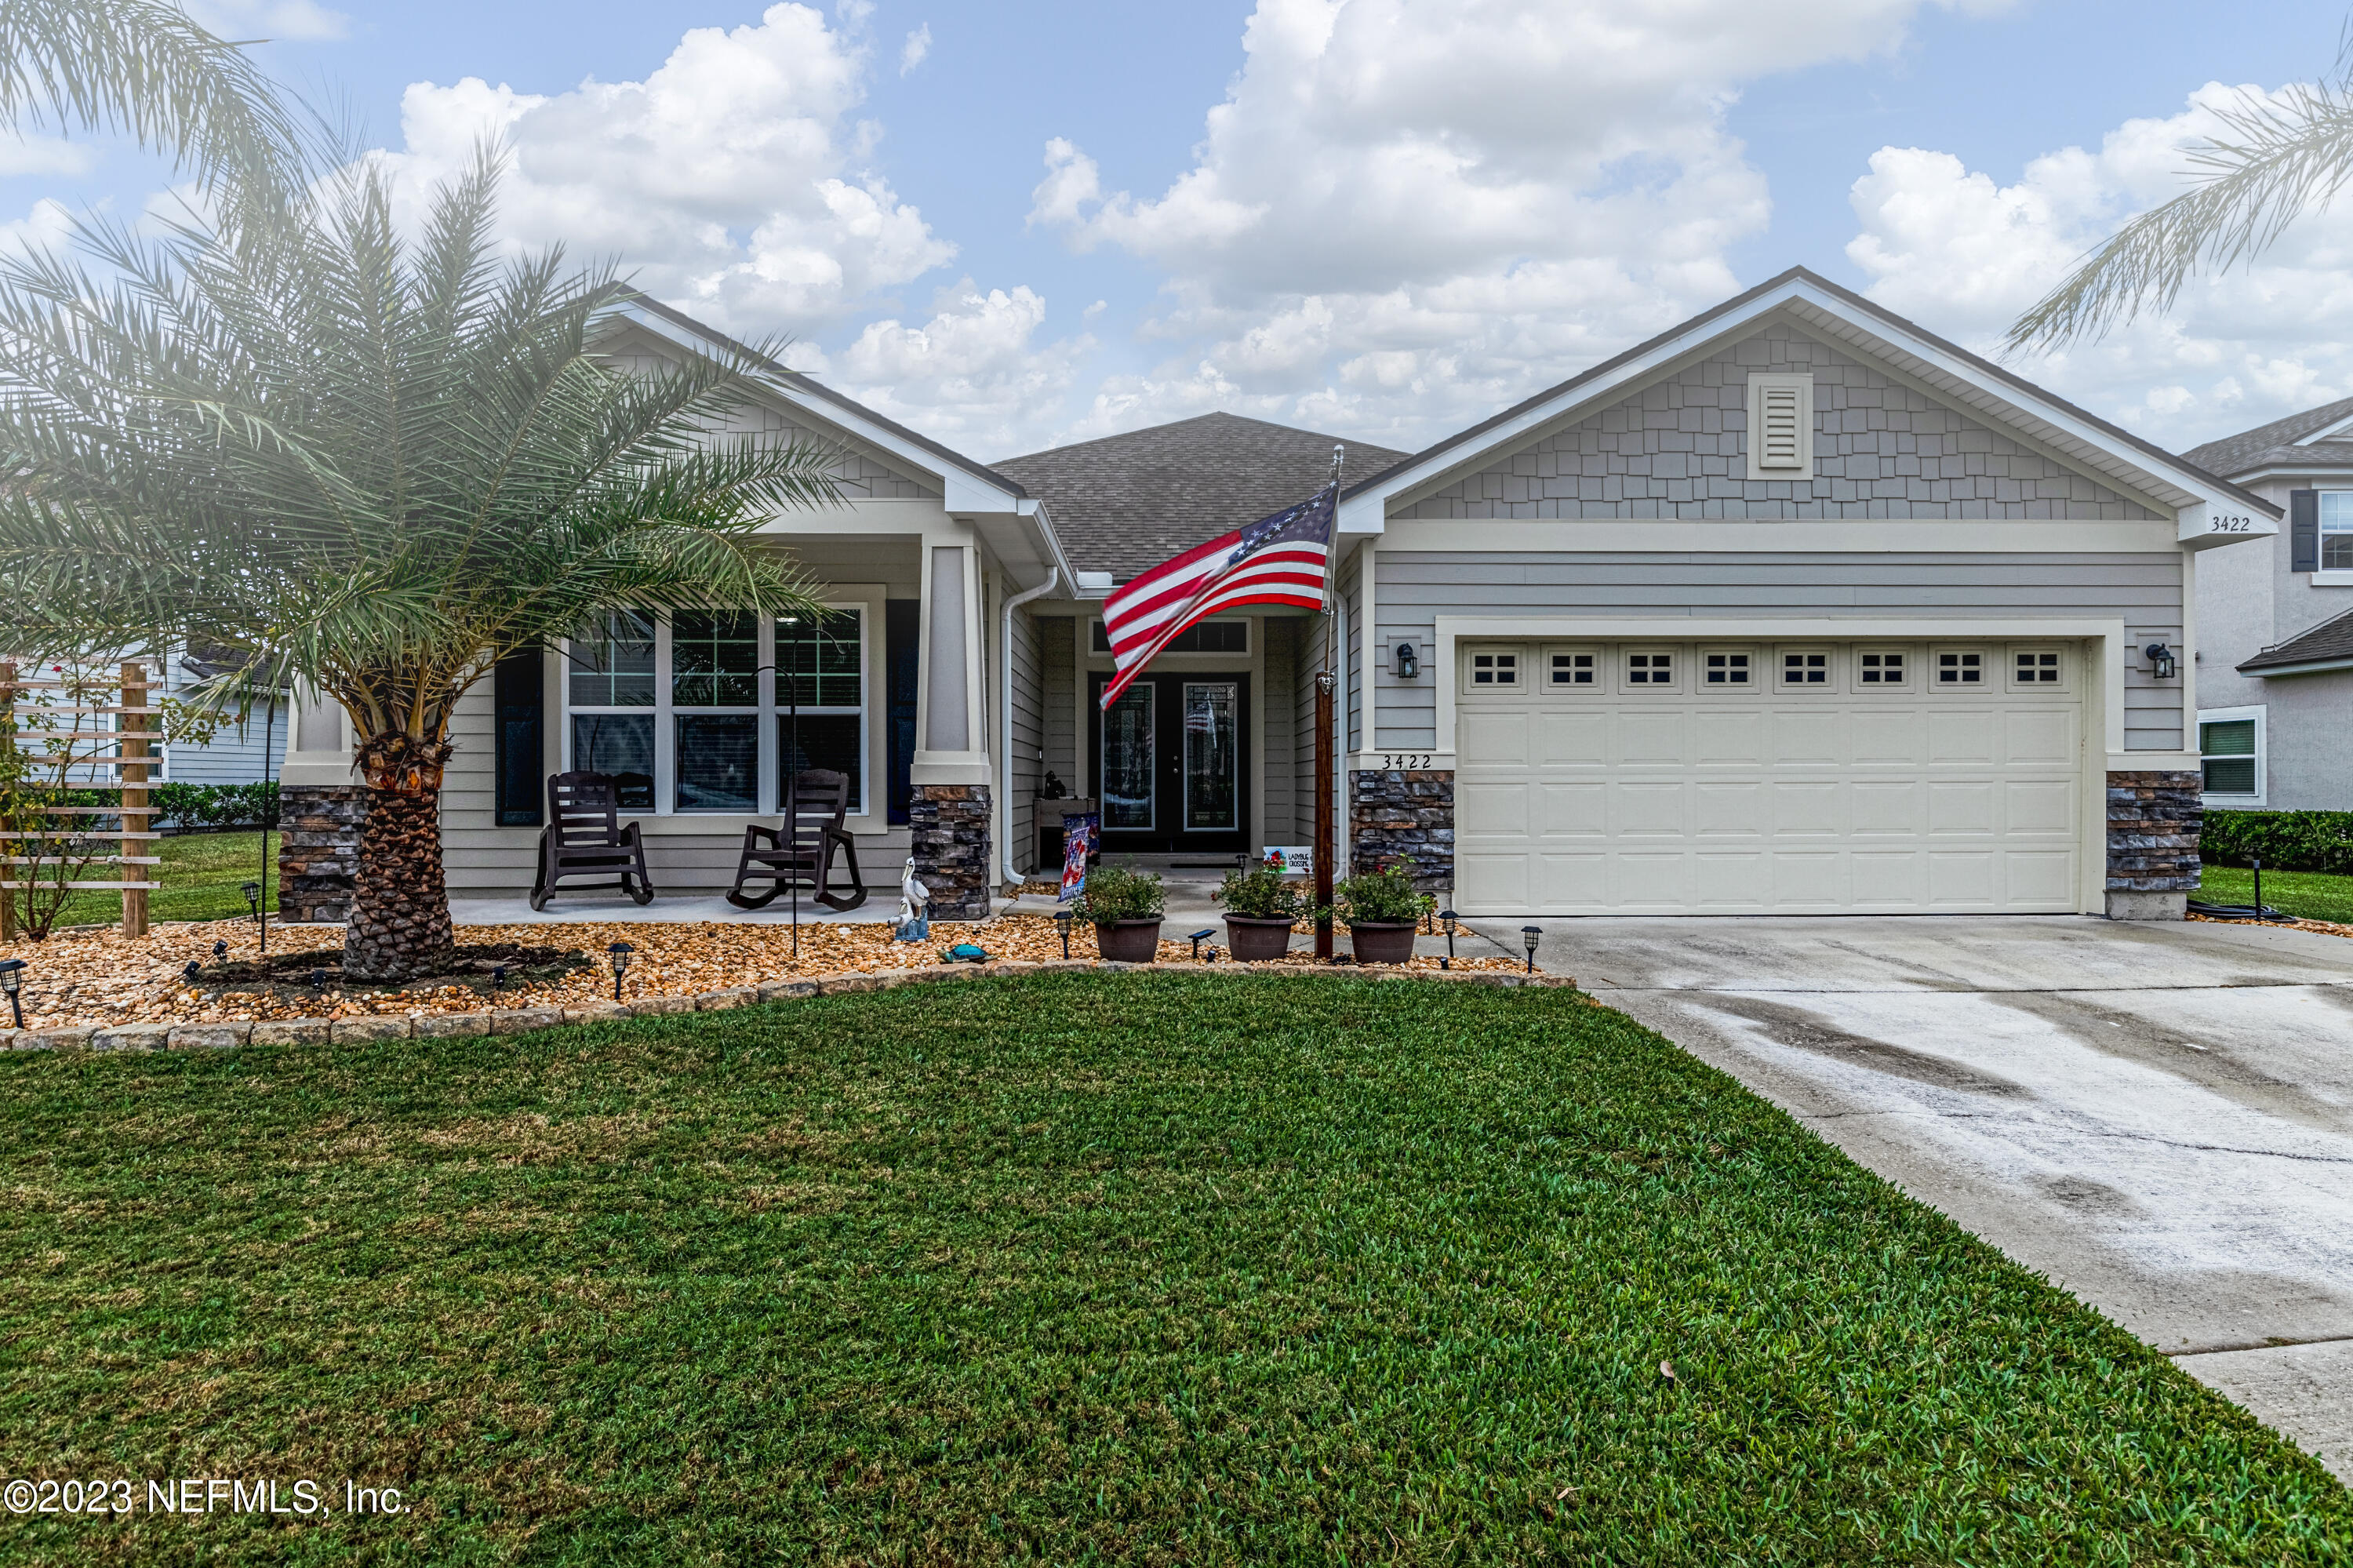 Green Cove Springs, FL home for sale located at 3422 OGLEBAY Drive, Green Cove Springs, FL 32043